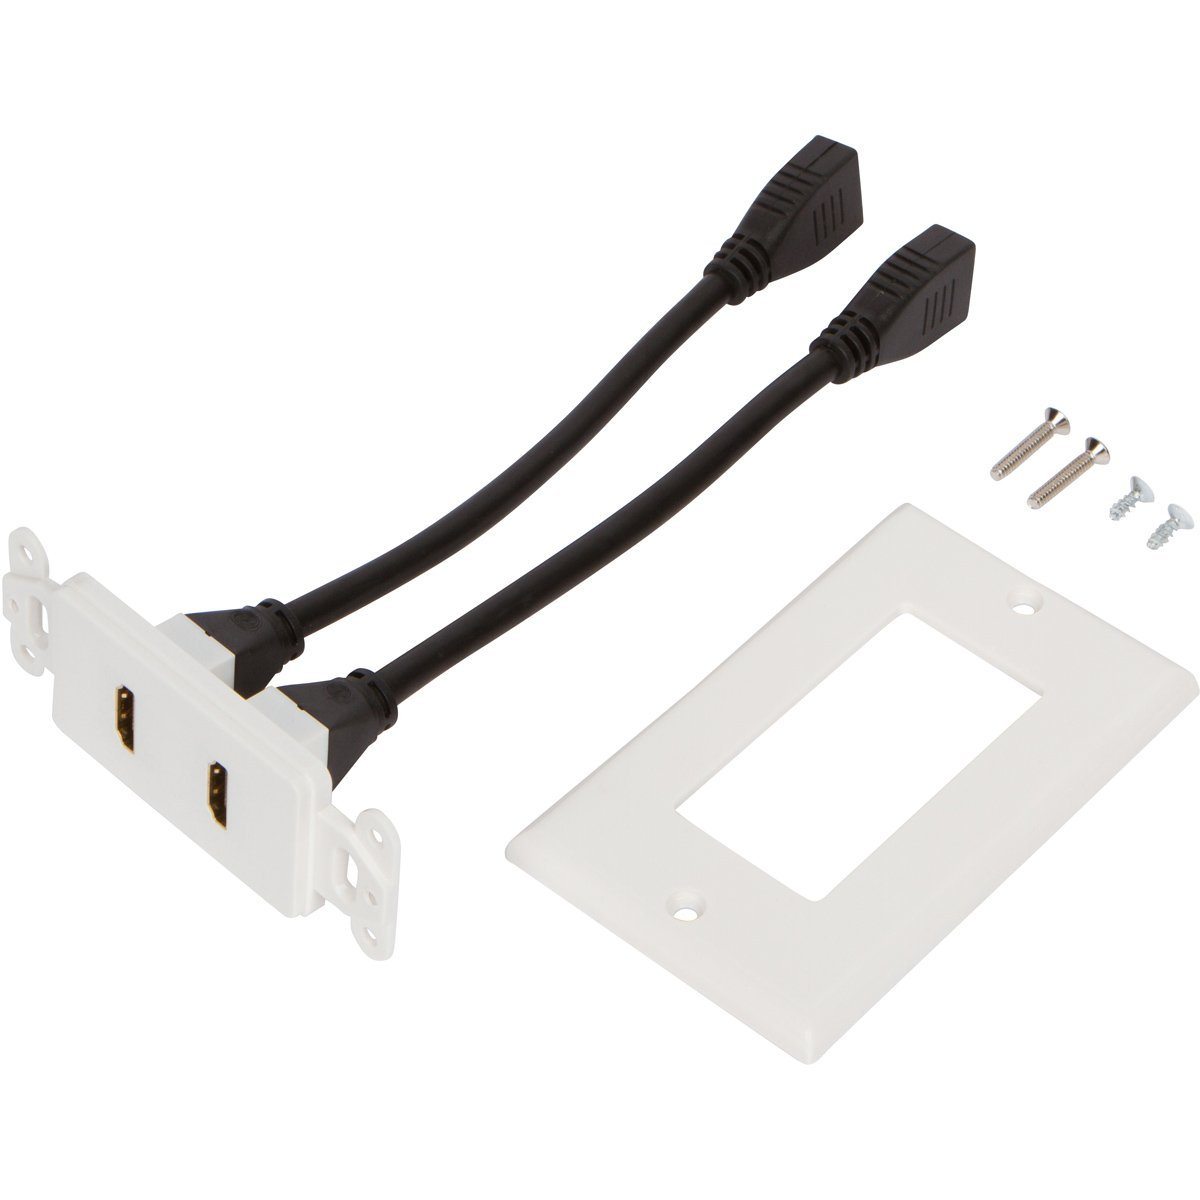 HDMI Wall Plate [UL Listed] (2 Port) Insert with 6-Inch Built-In Flexible  Hi-Speed HDMI Cable (White) (2 Pack)